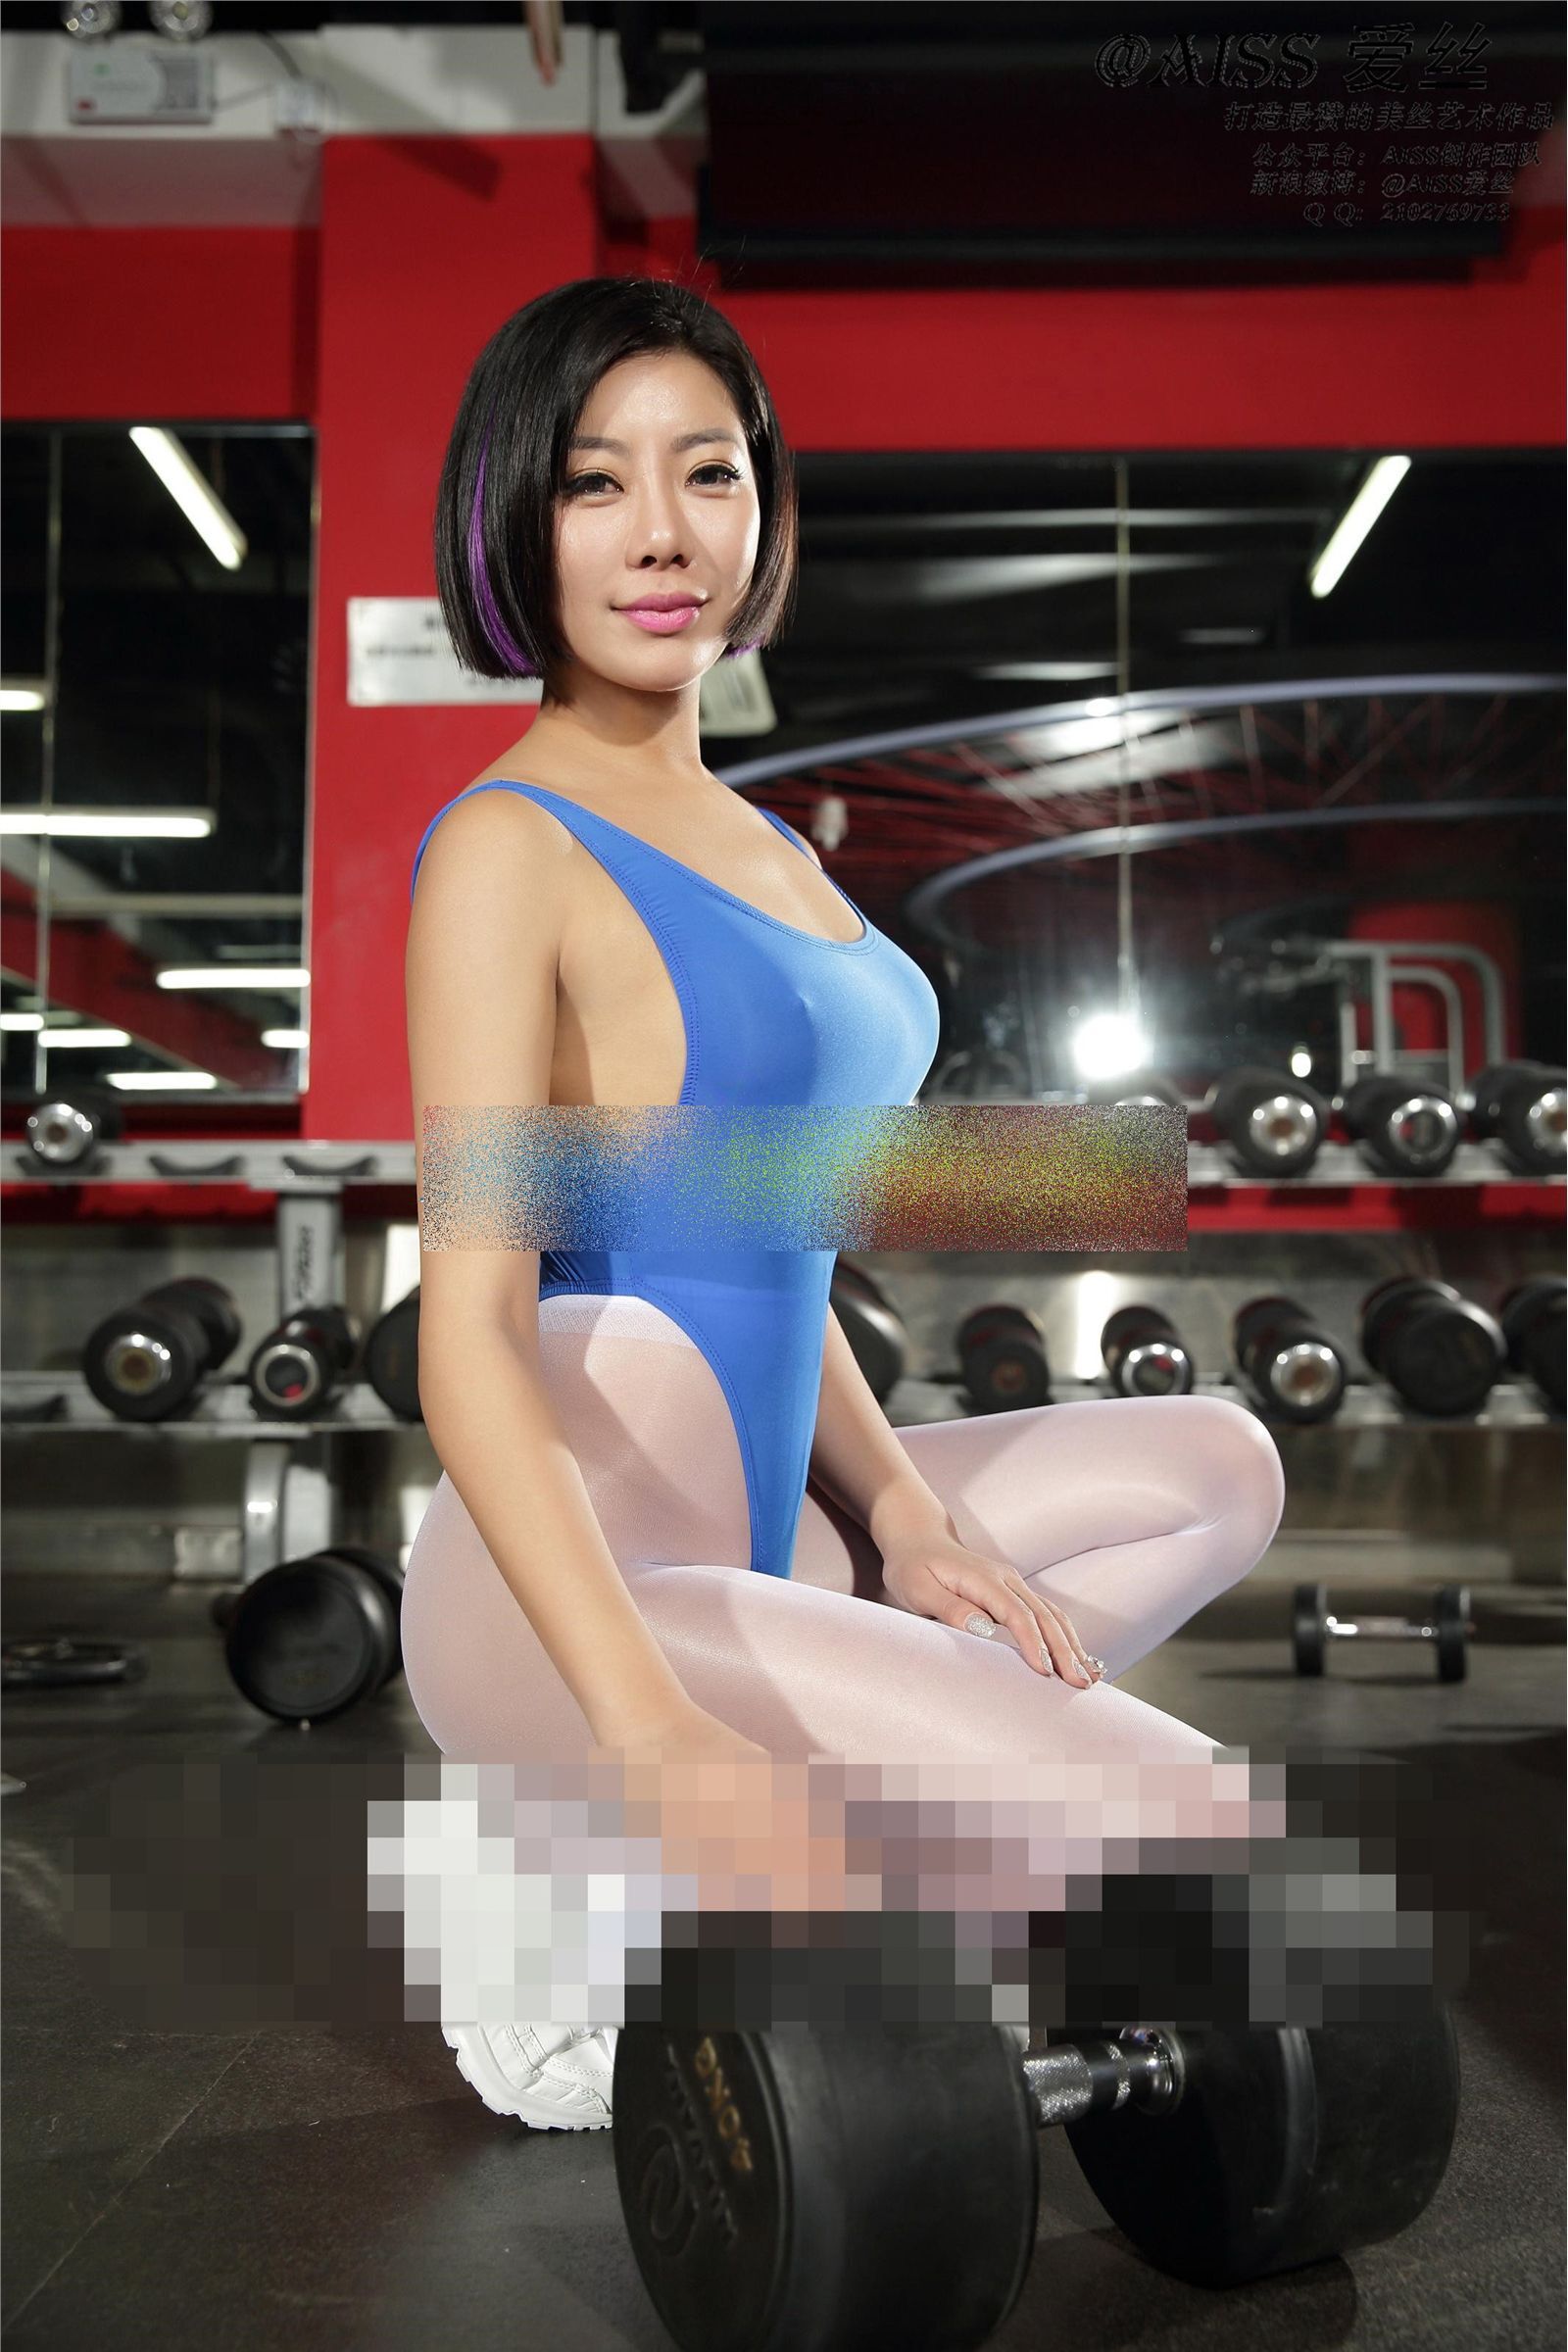 [AISs] April 24, 2014 Xuanxuan goes to fitness